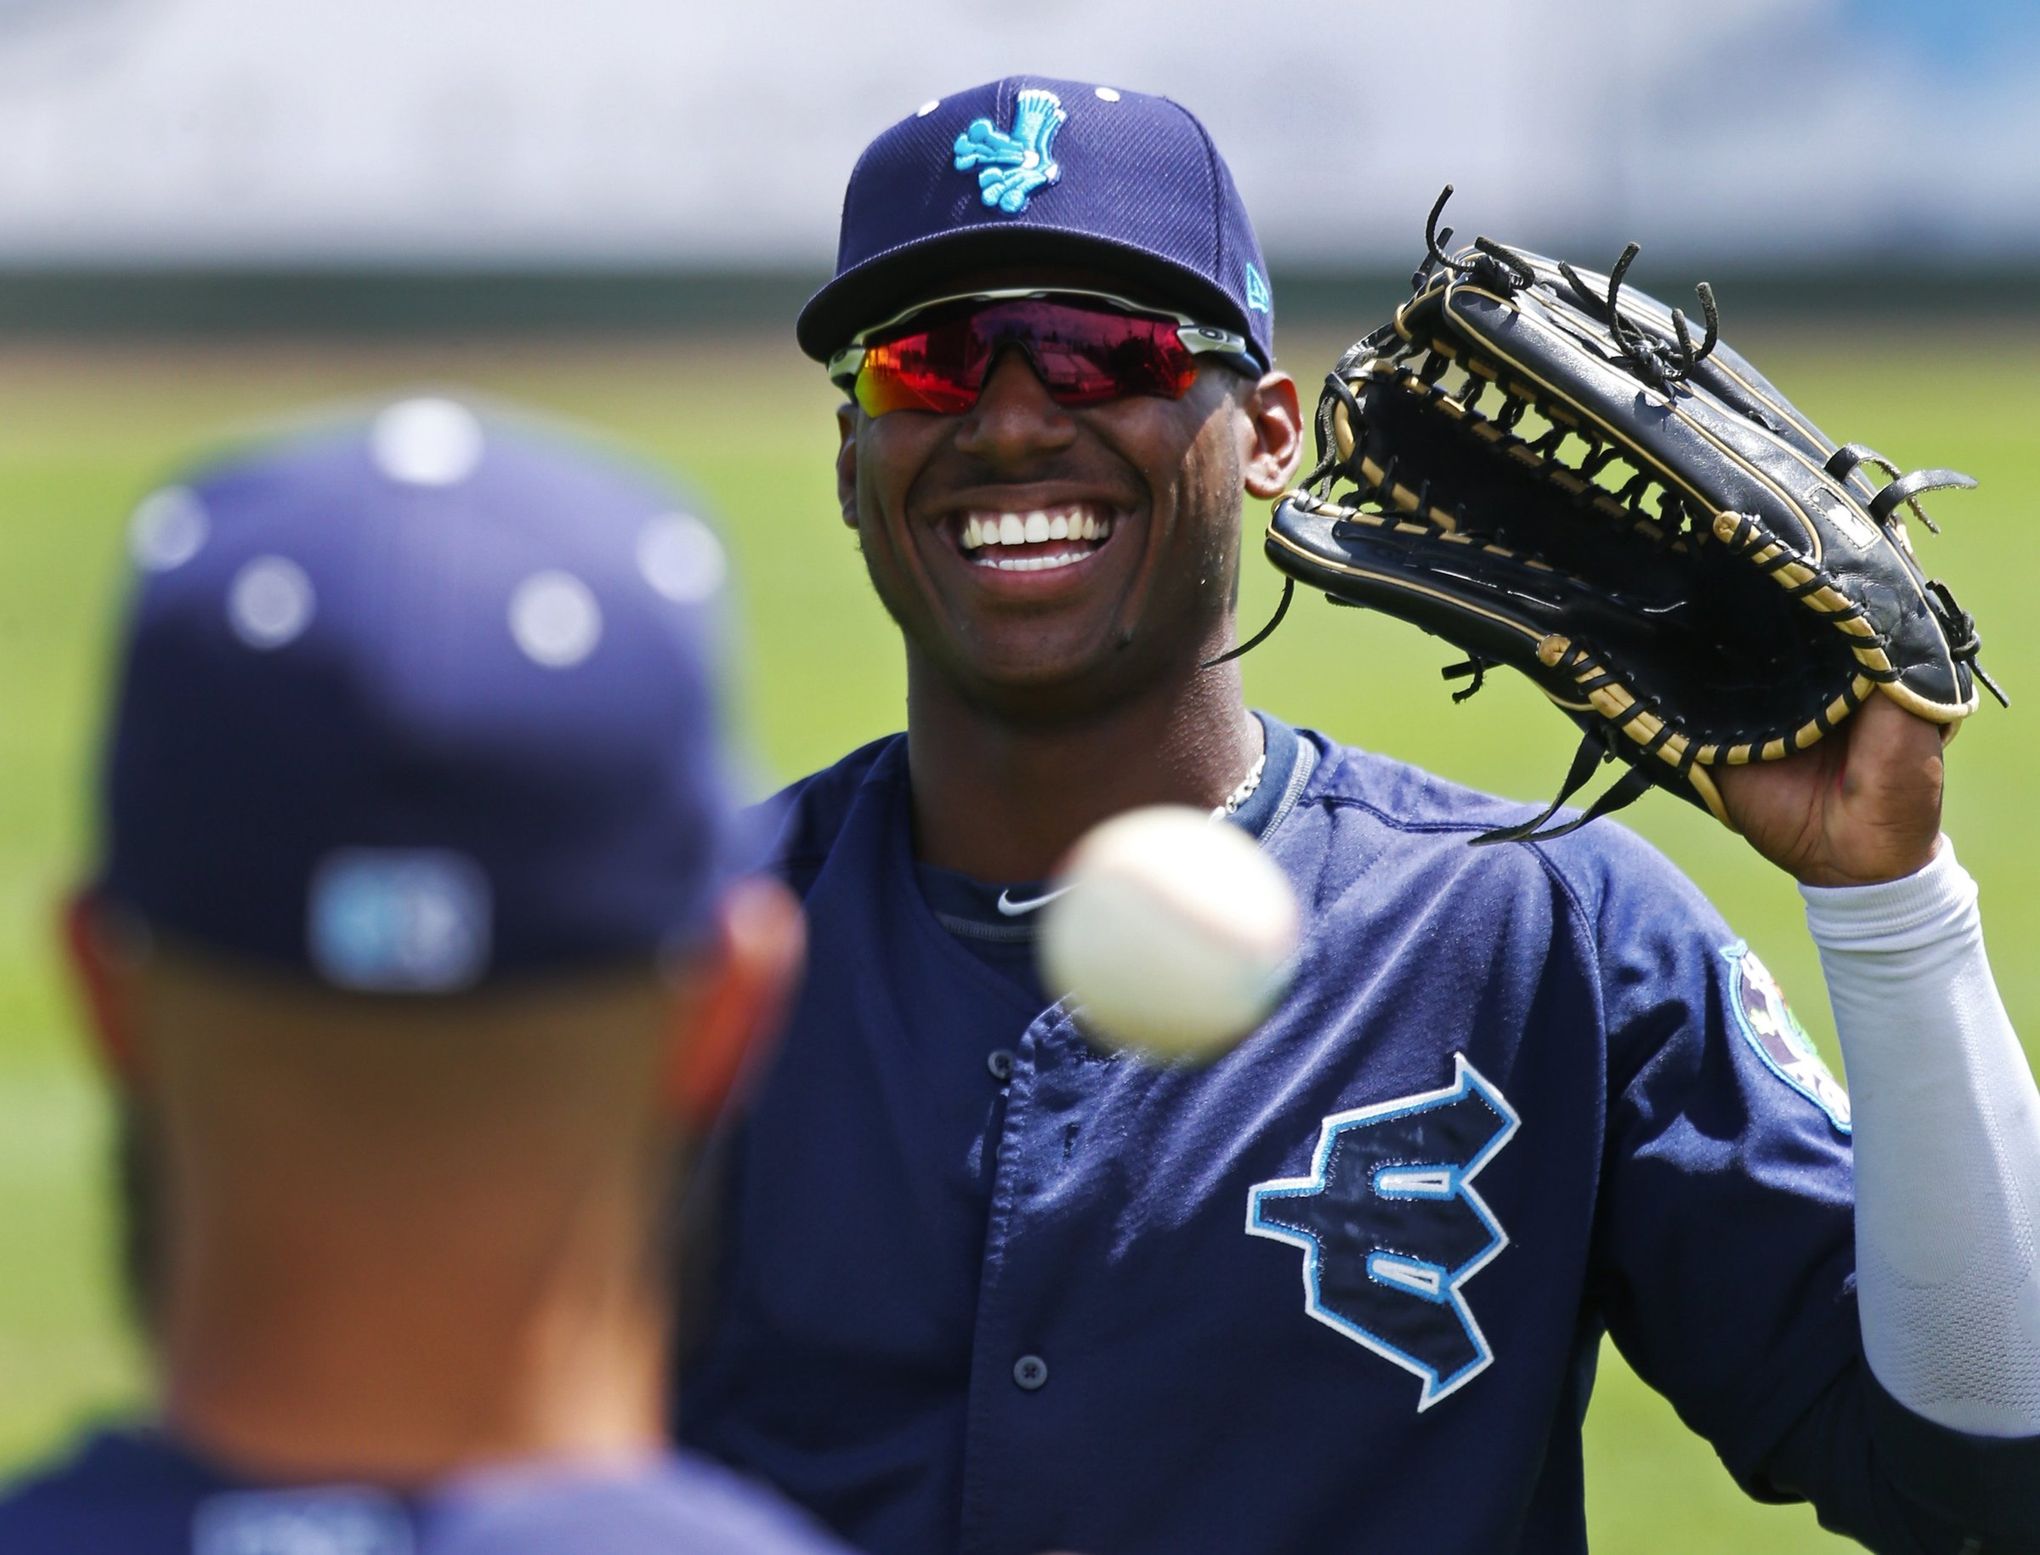 Where Do Luis Robert, Kyle Lewis Rank Among Best Rookie OFs in